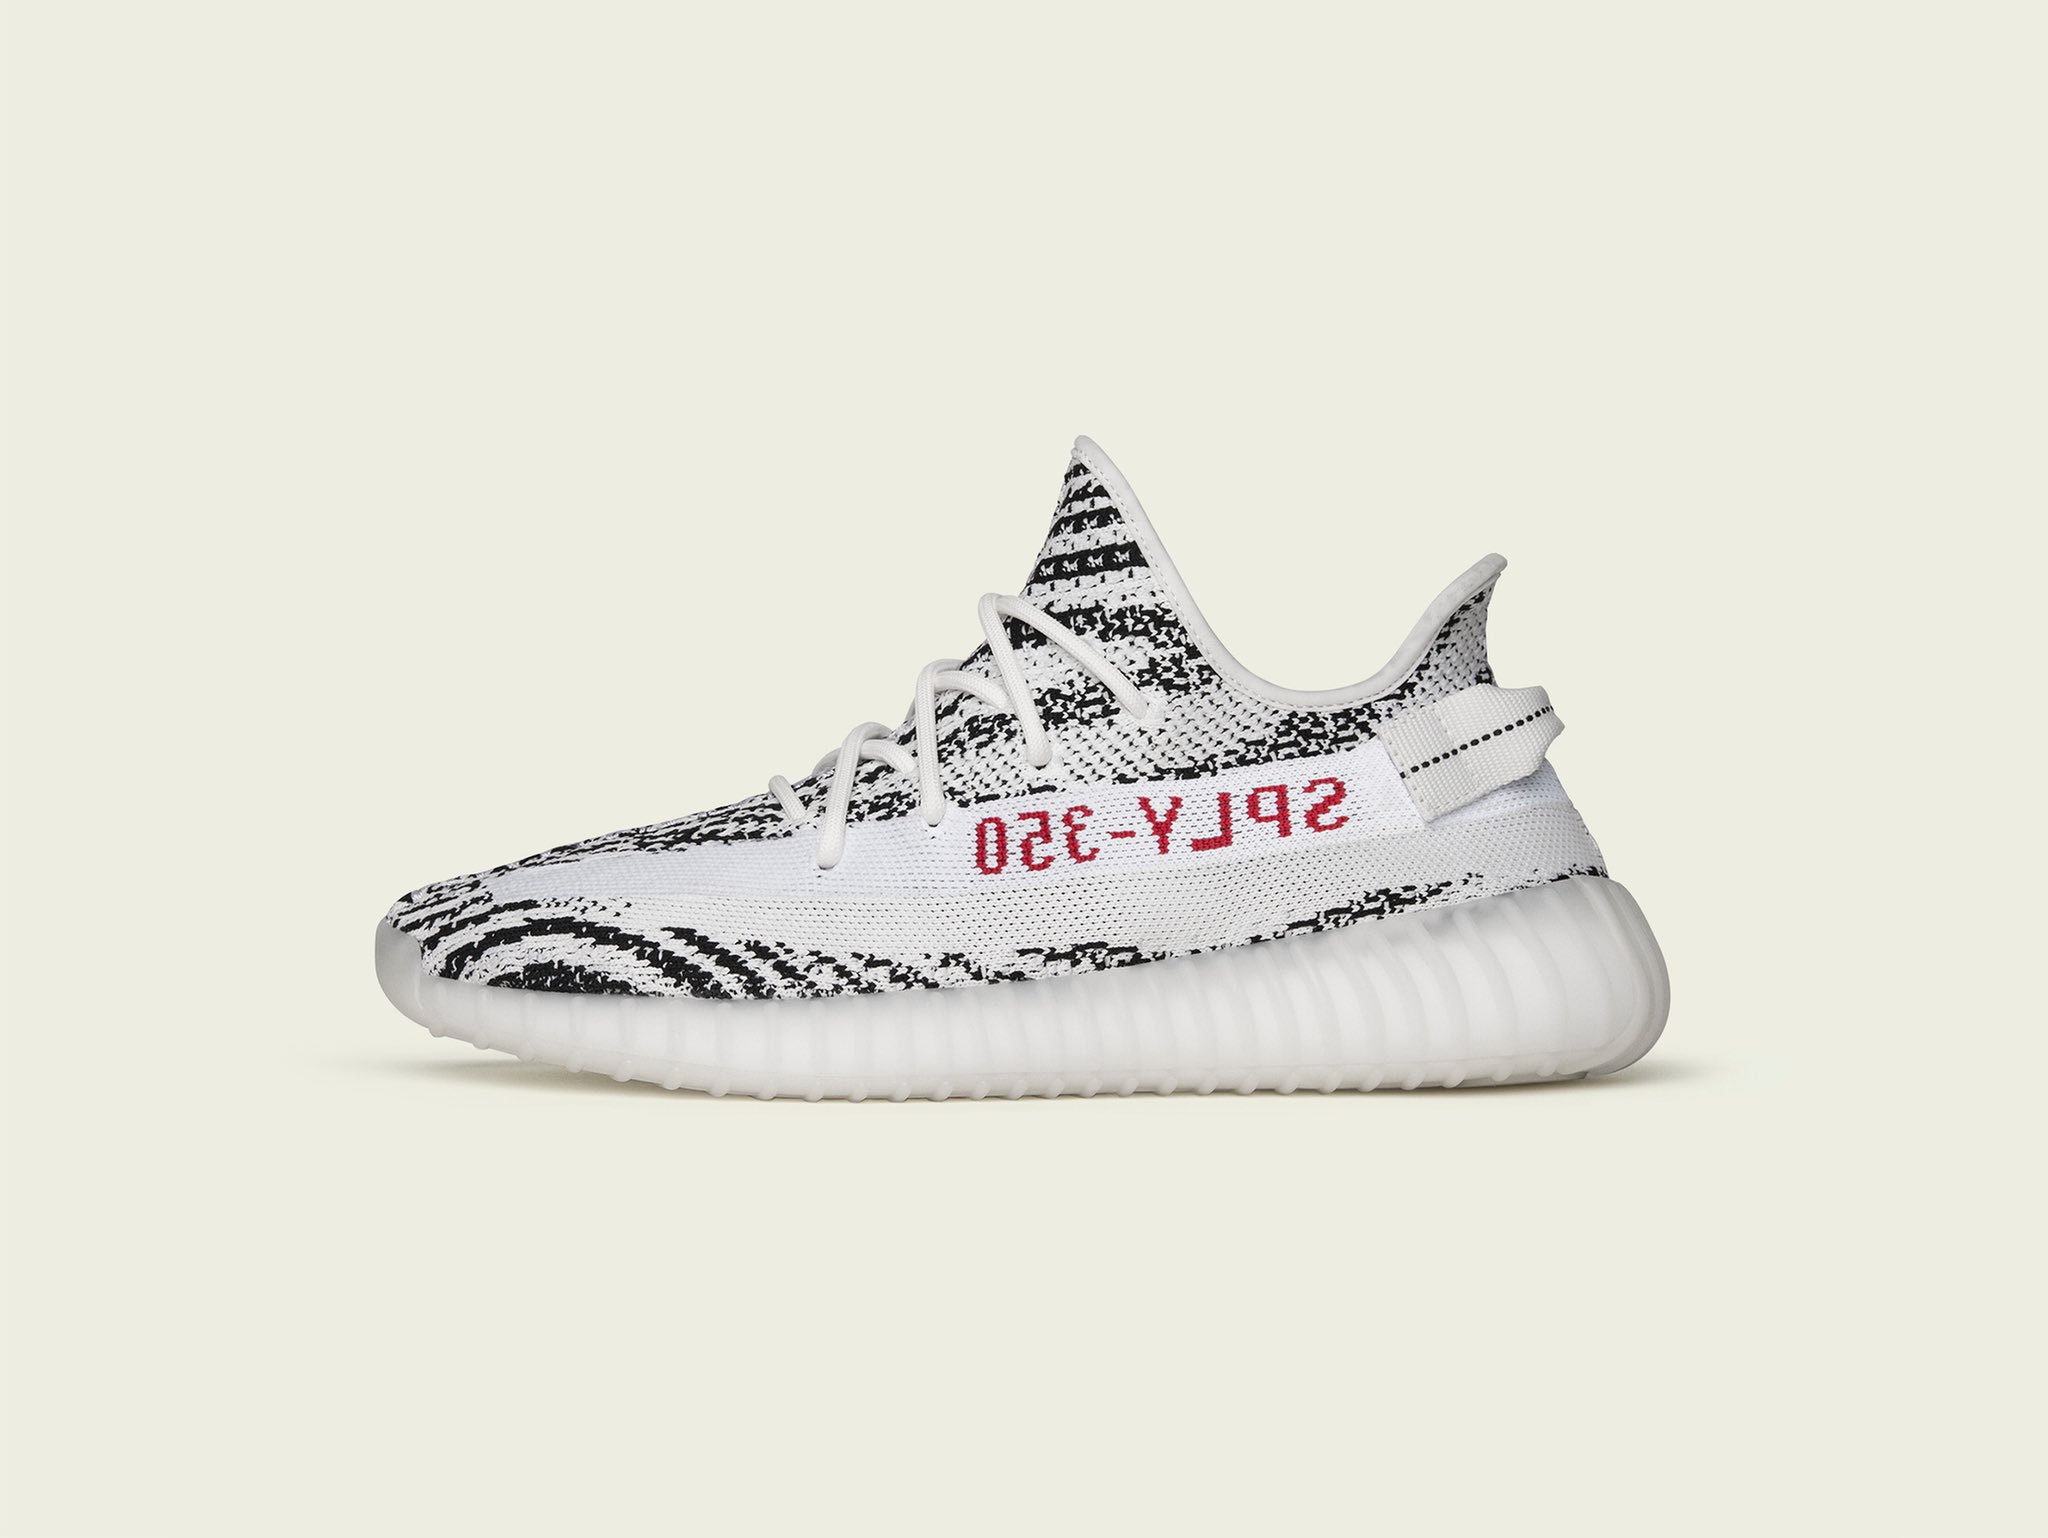 uberørt turnering lån Jimmy Jazz on Twitter: "The adidas YEEZY BOOST 350 V2 White/Core Black/Red  release this Fri 11/16⠀ Today 11/13- Raffle begins in select Jimmy Jazz  stores⠀ Tomorrow 11/14 – Raffles end at 2pm⠀